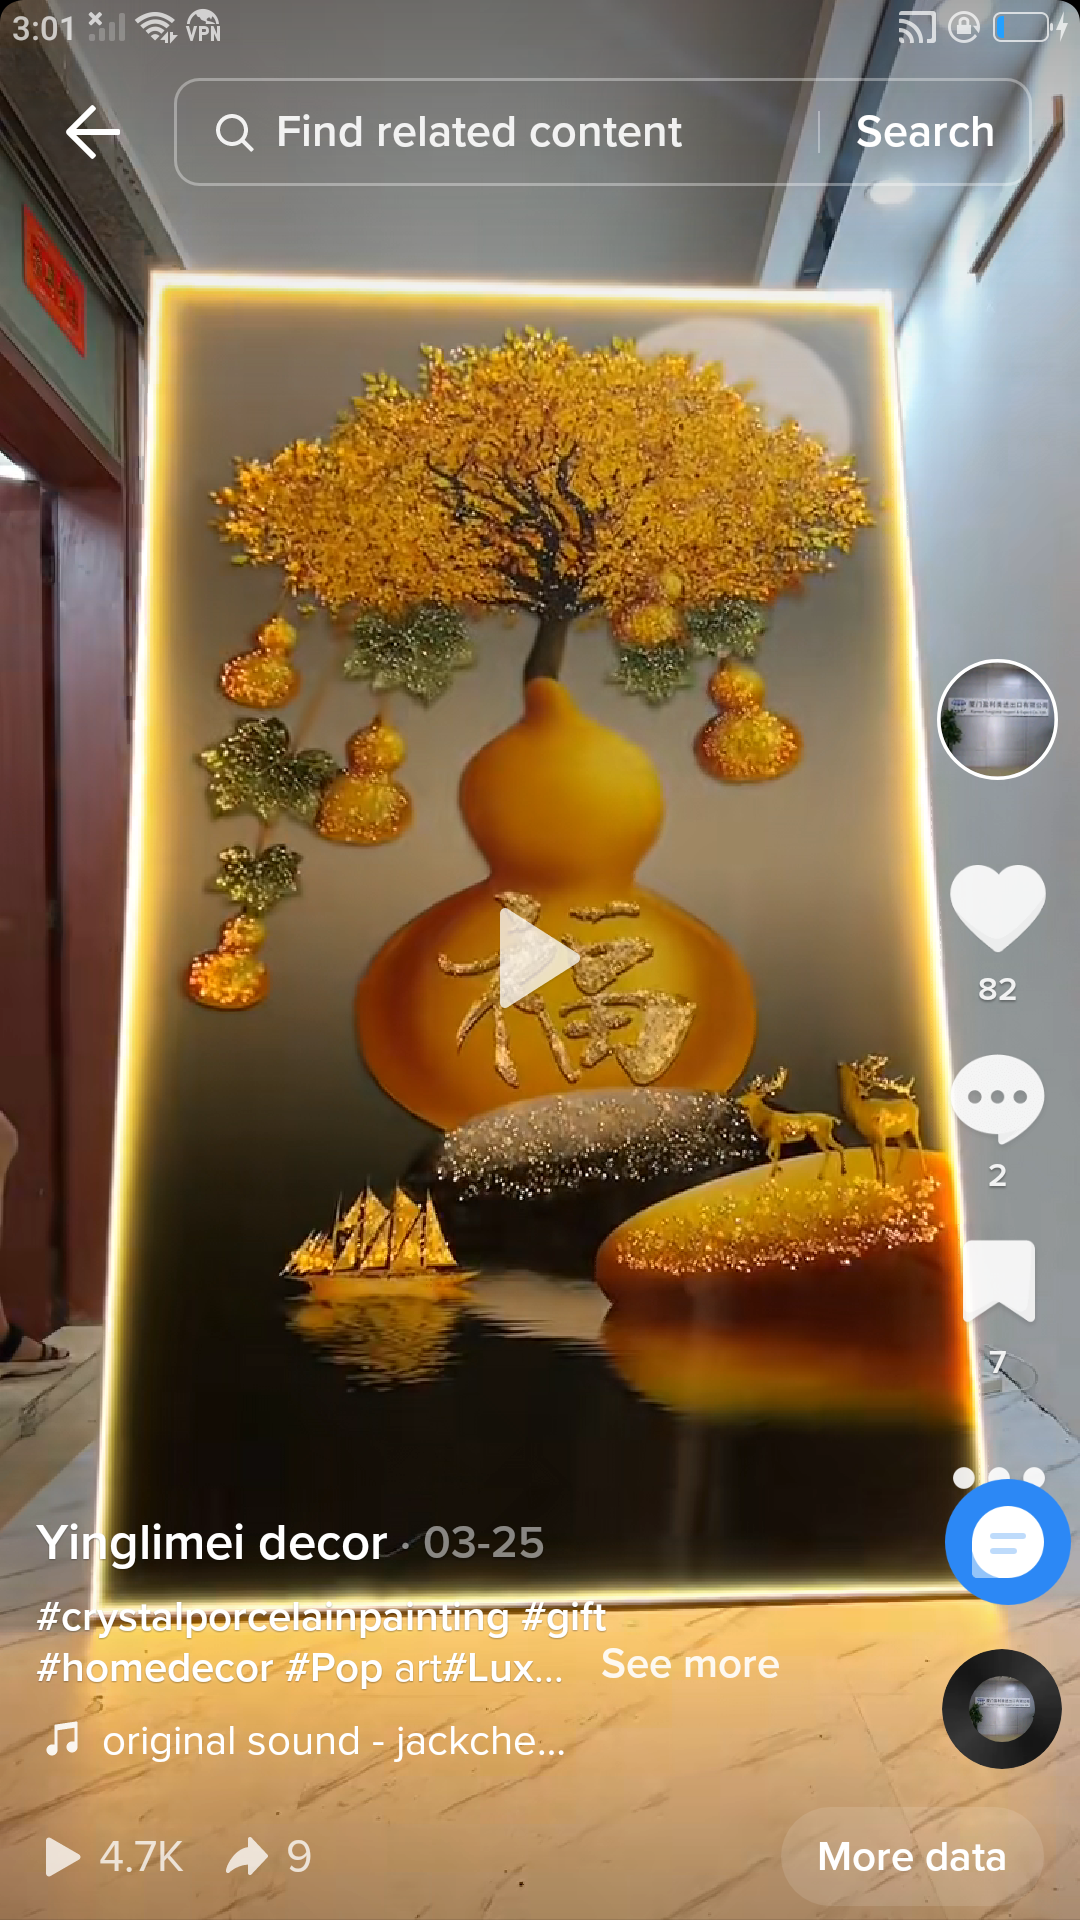 Decorative painting of money tree full of gold wallpaintings.